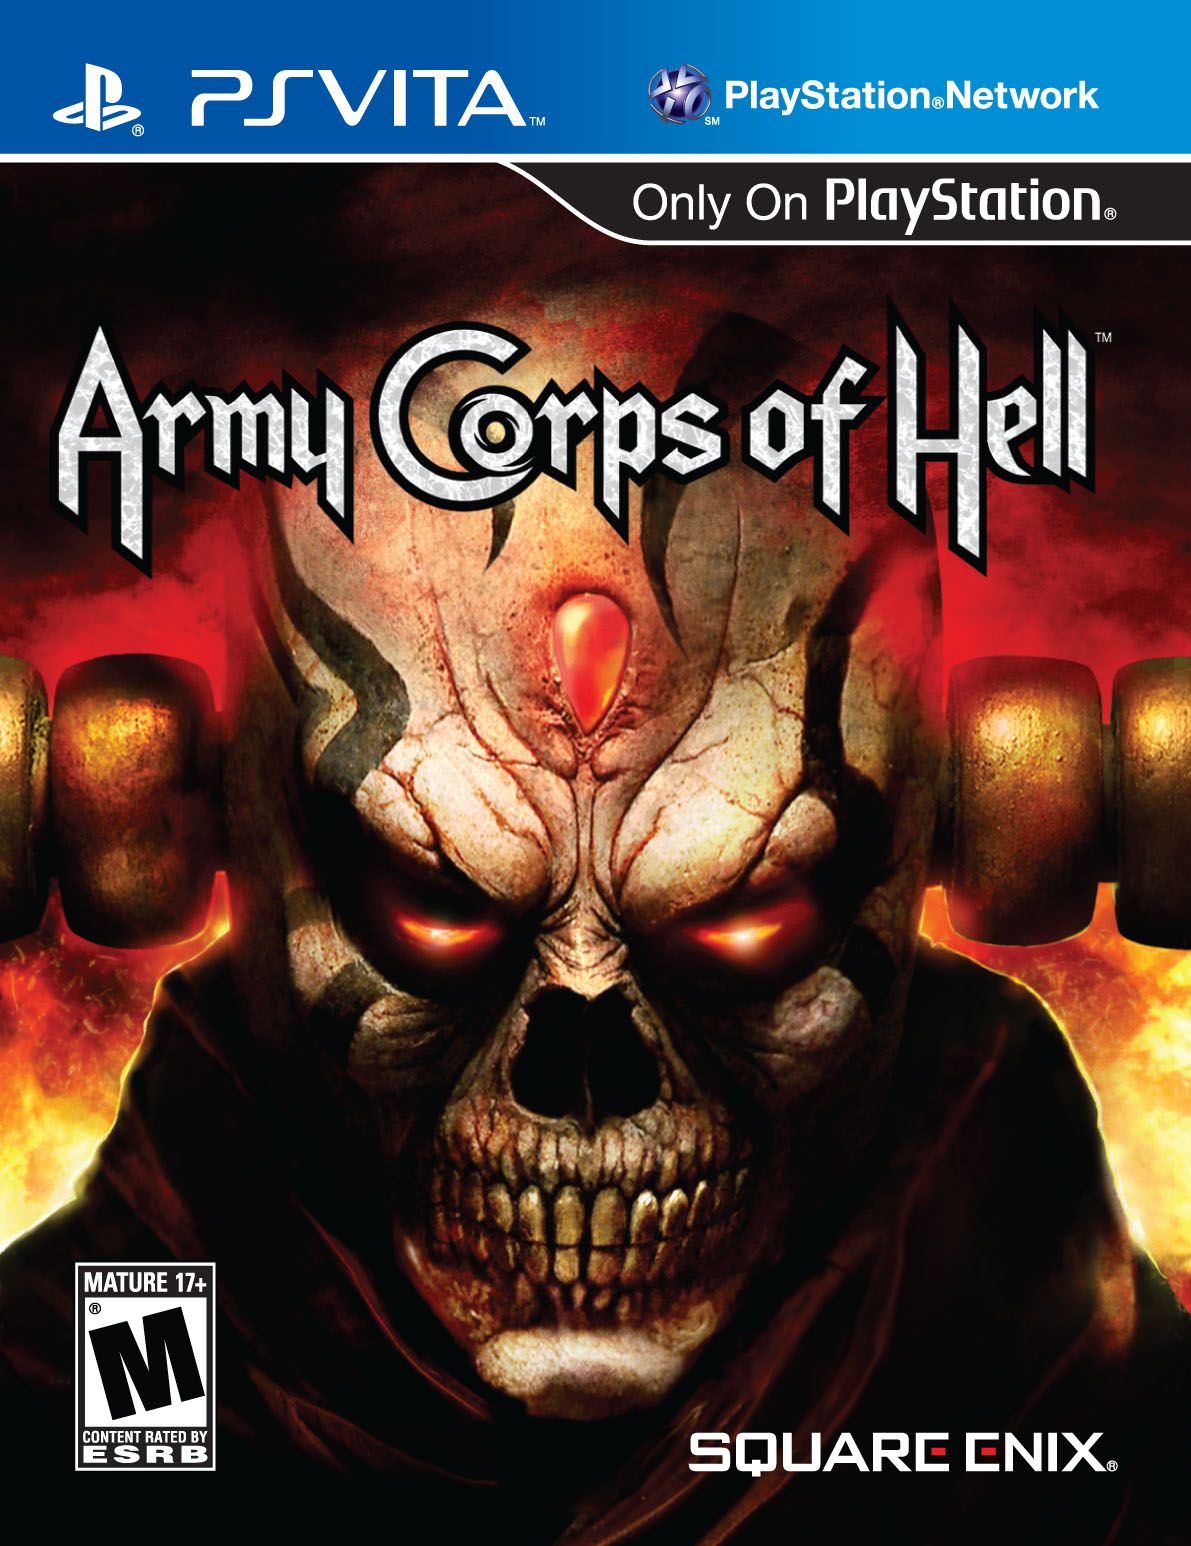 Army Corps Of Hell Backgrounds, Compatible - PC, Mobile, Gadgets| 1191x1546 px